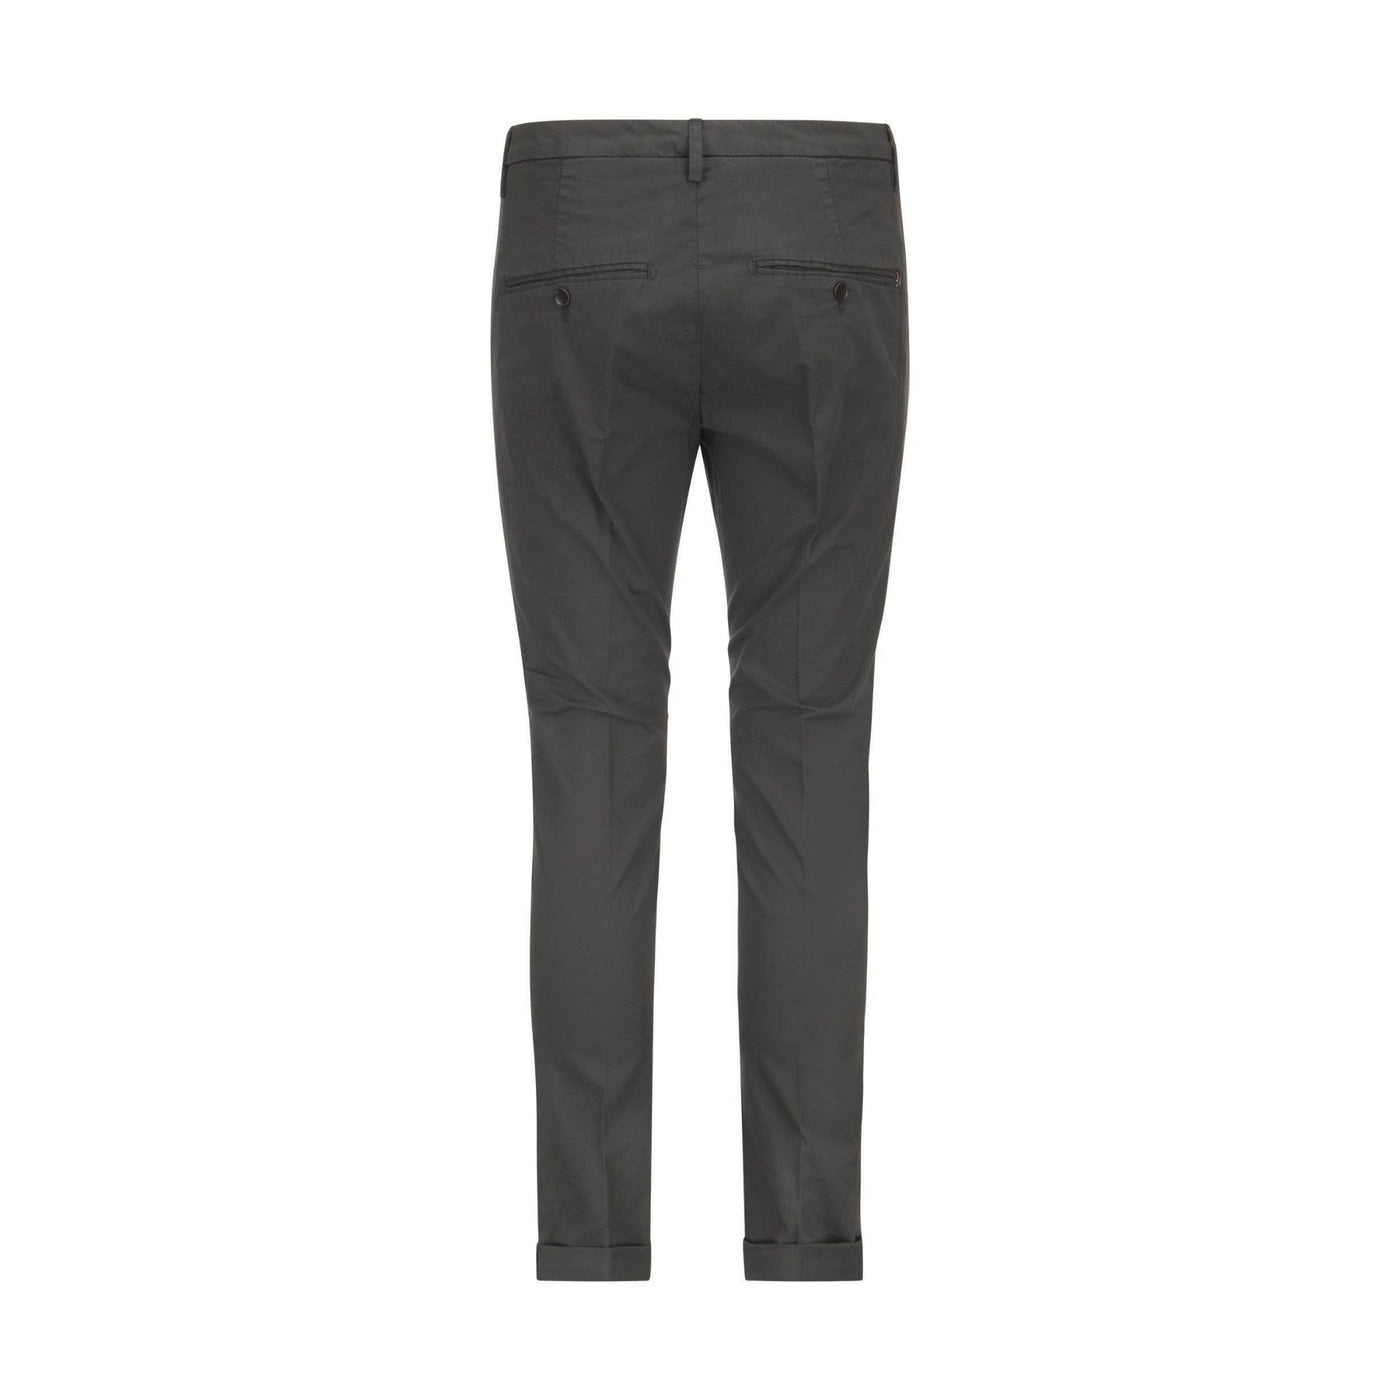 Men's trousers in solid color cotton